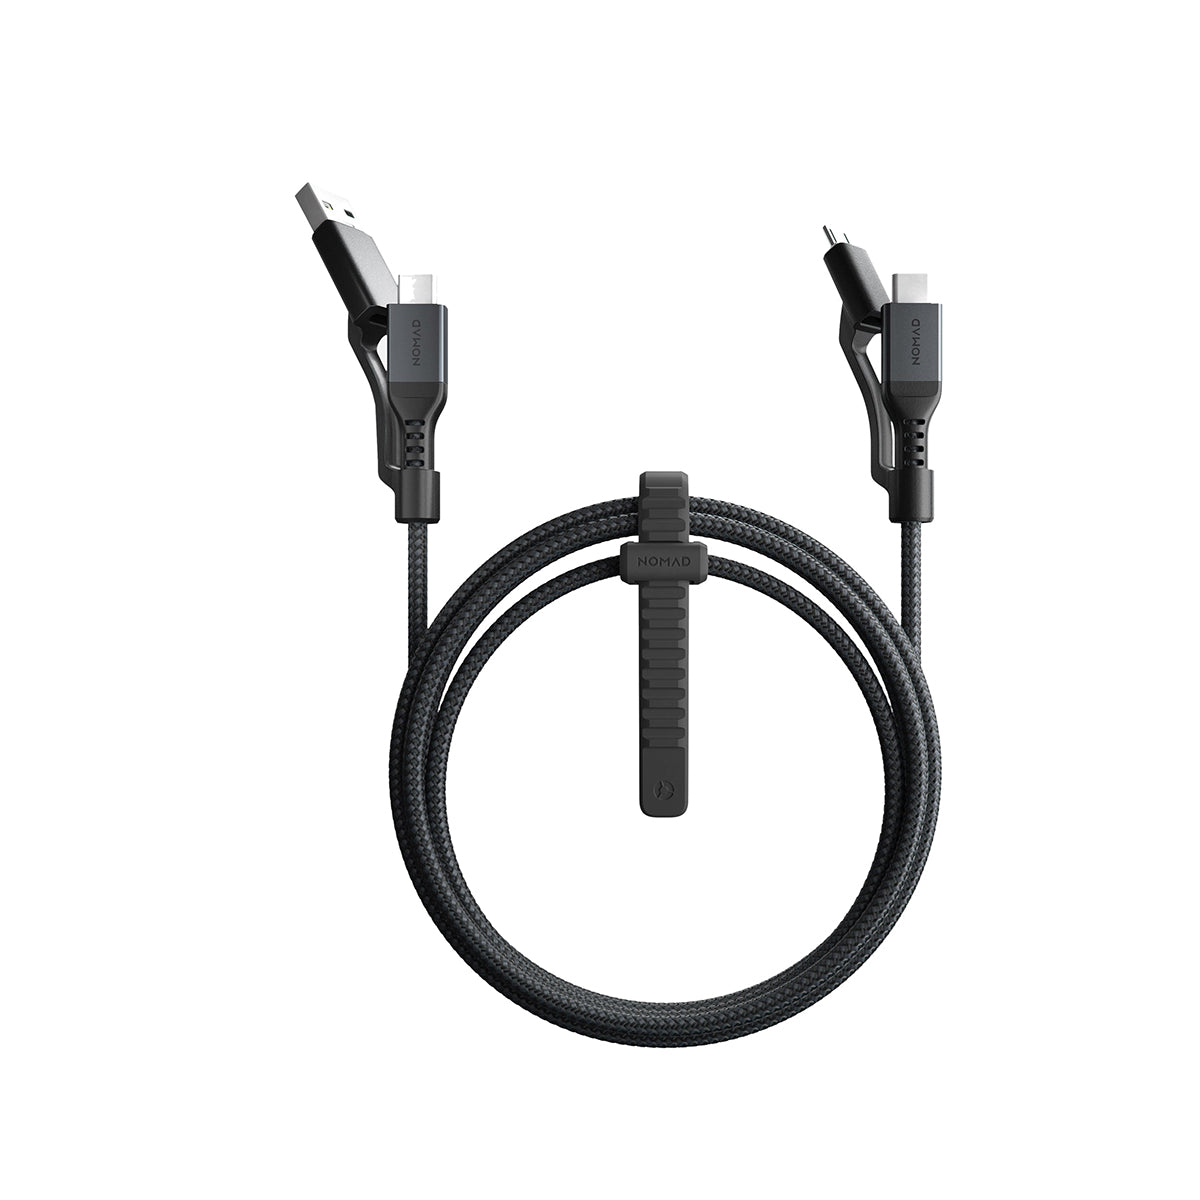 NOMAD Kevlar Universal Cable USB C V2 - 1.5M For C Type Charger